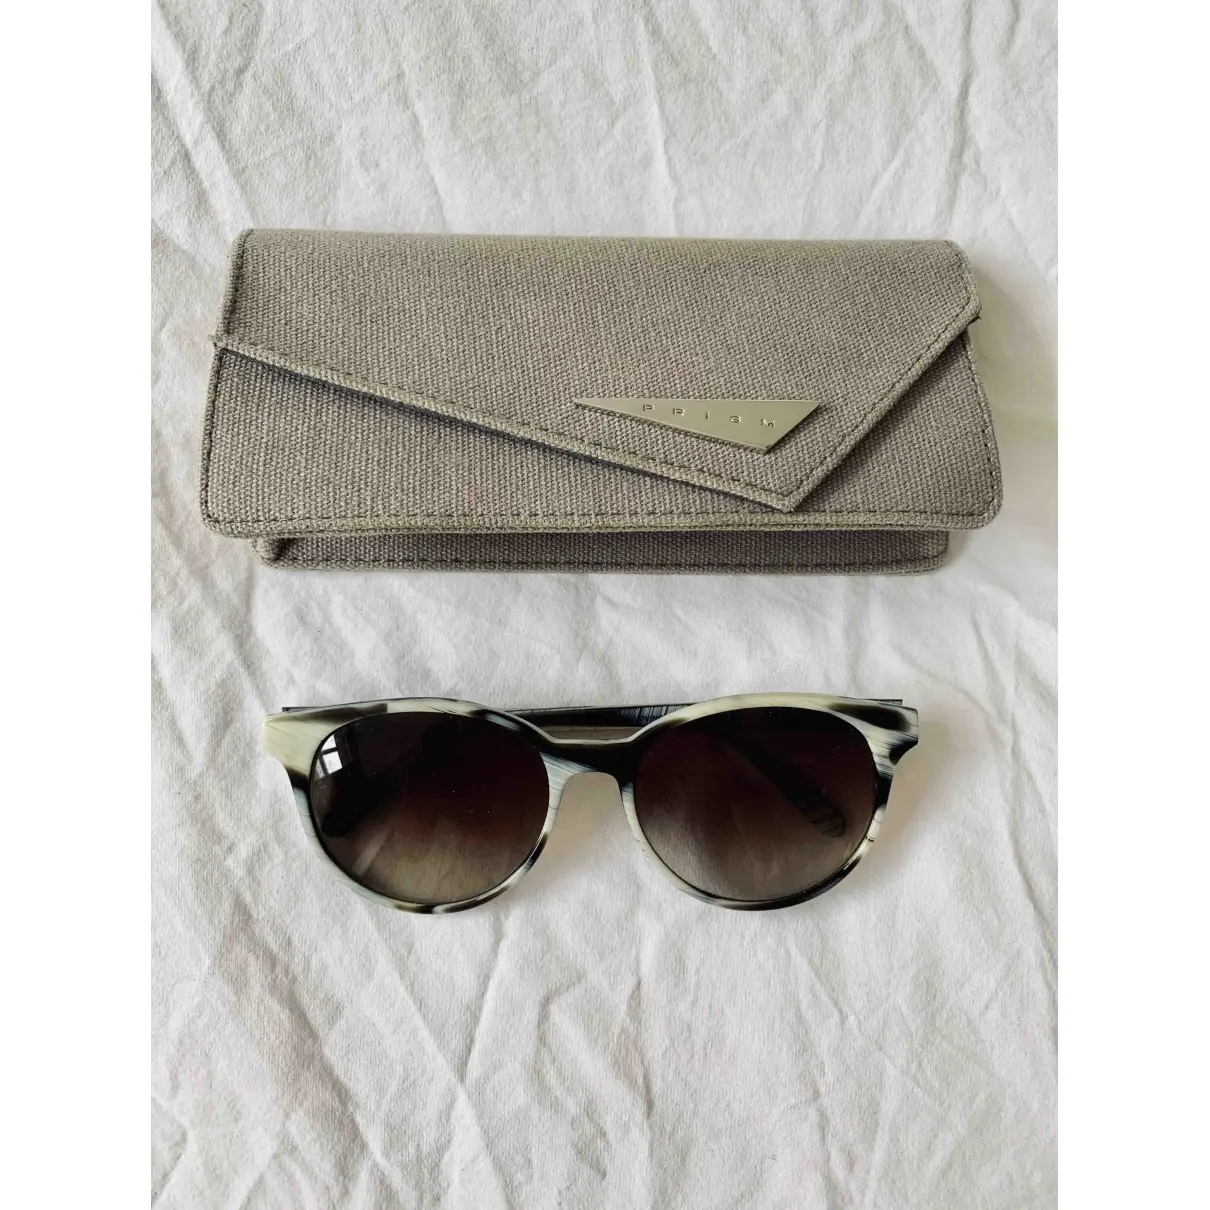 Prism Oversized sunglasses for sale